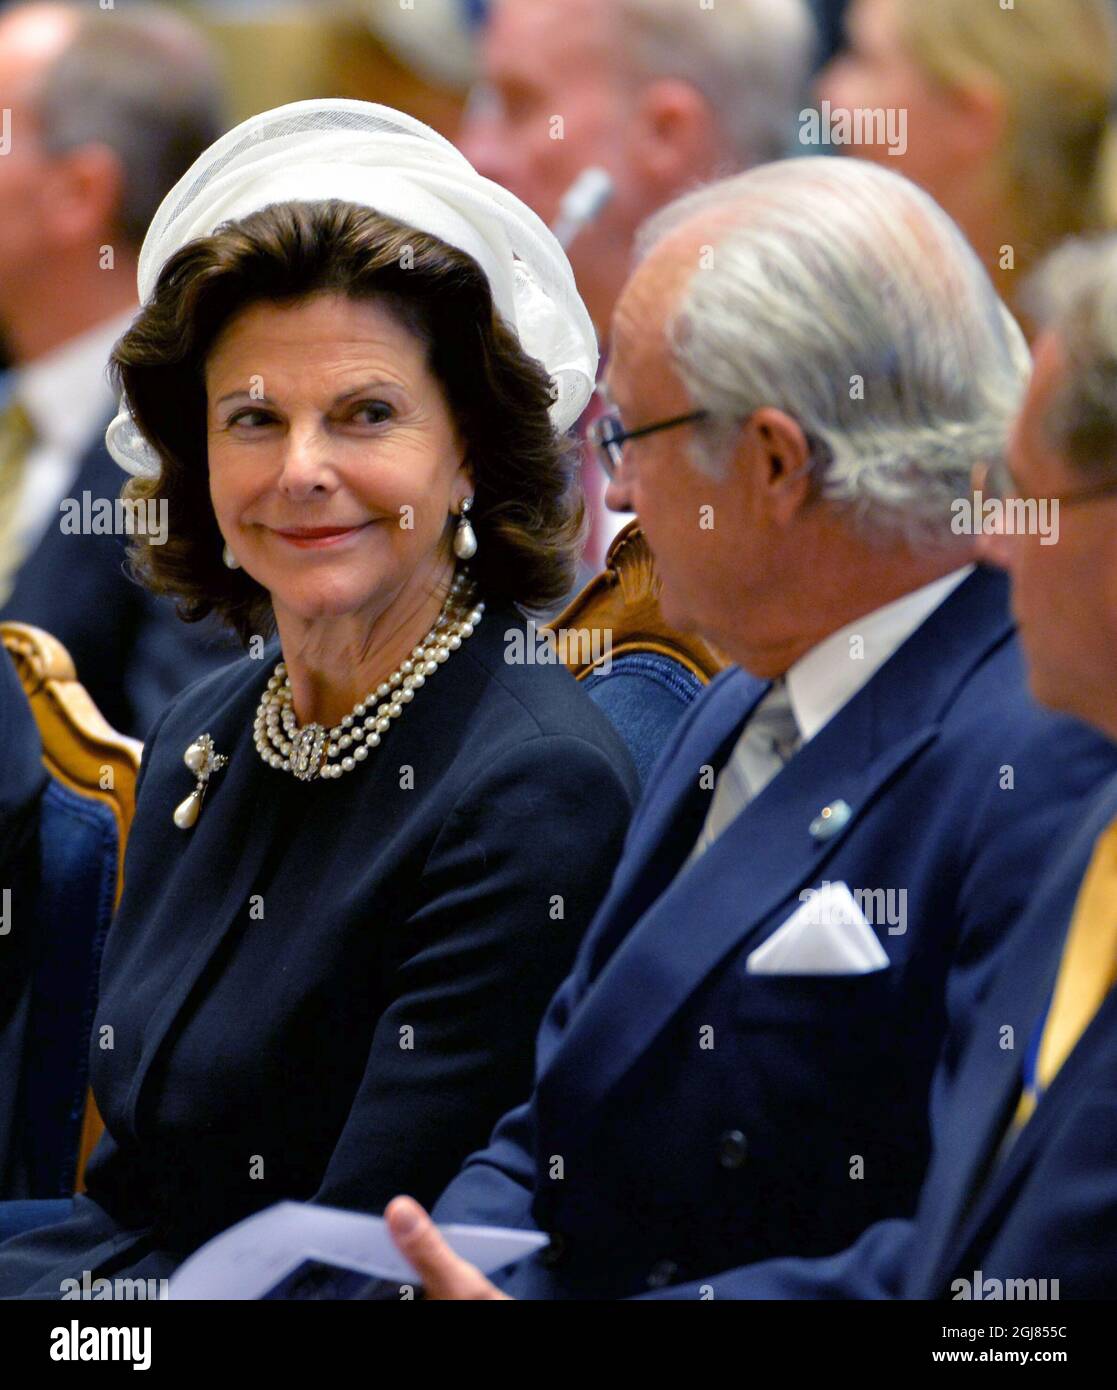 STOCKHOLM 2013-09-17 Queen Silvia and King Carl Gustaf attend the opening of the Parliament in Stockholm, Sweden, September 17, 2013 Foto: Jonas Ekstromer / SCANPIX / Kod 10030  Stock Photo